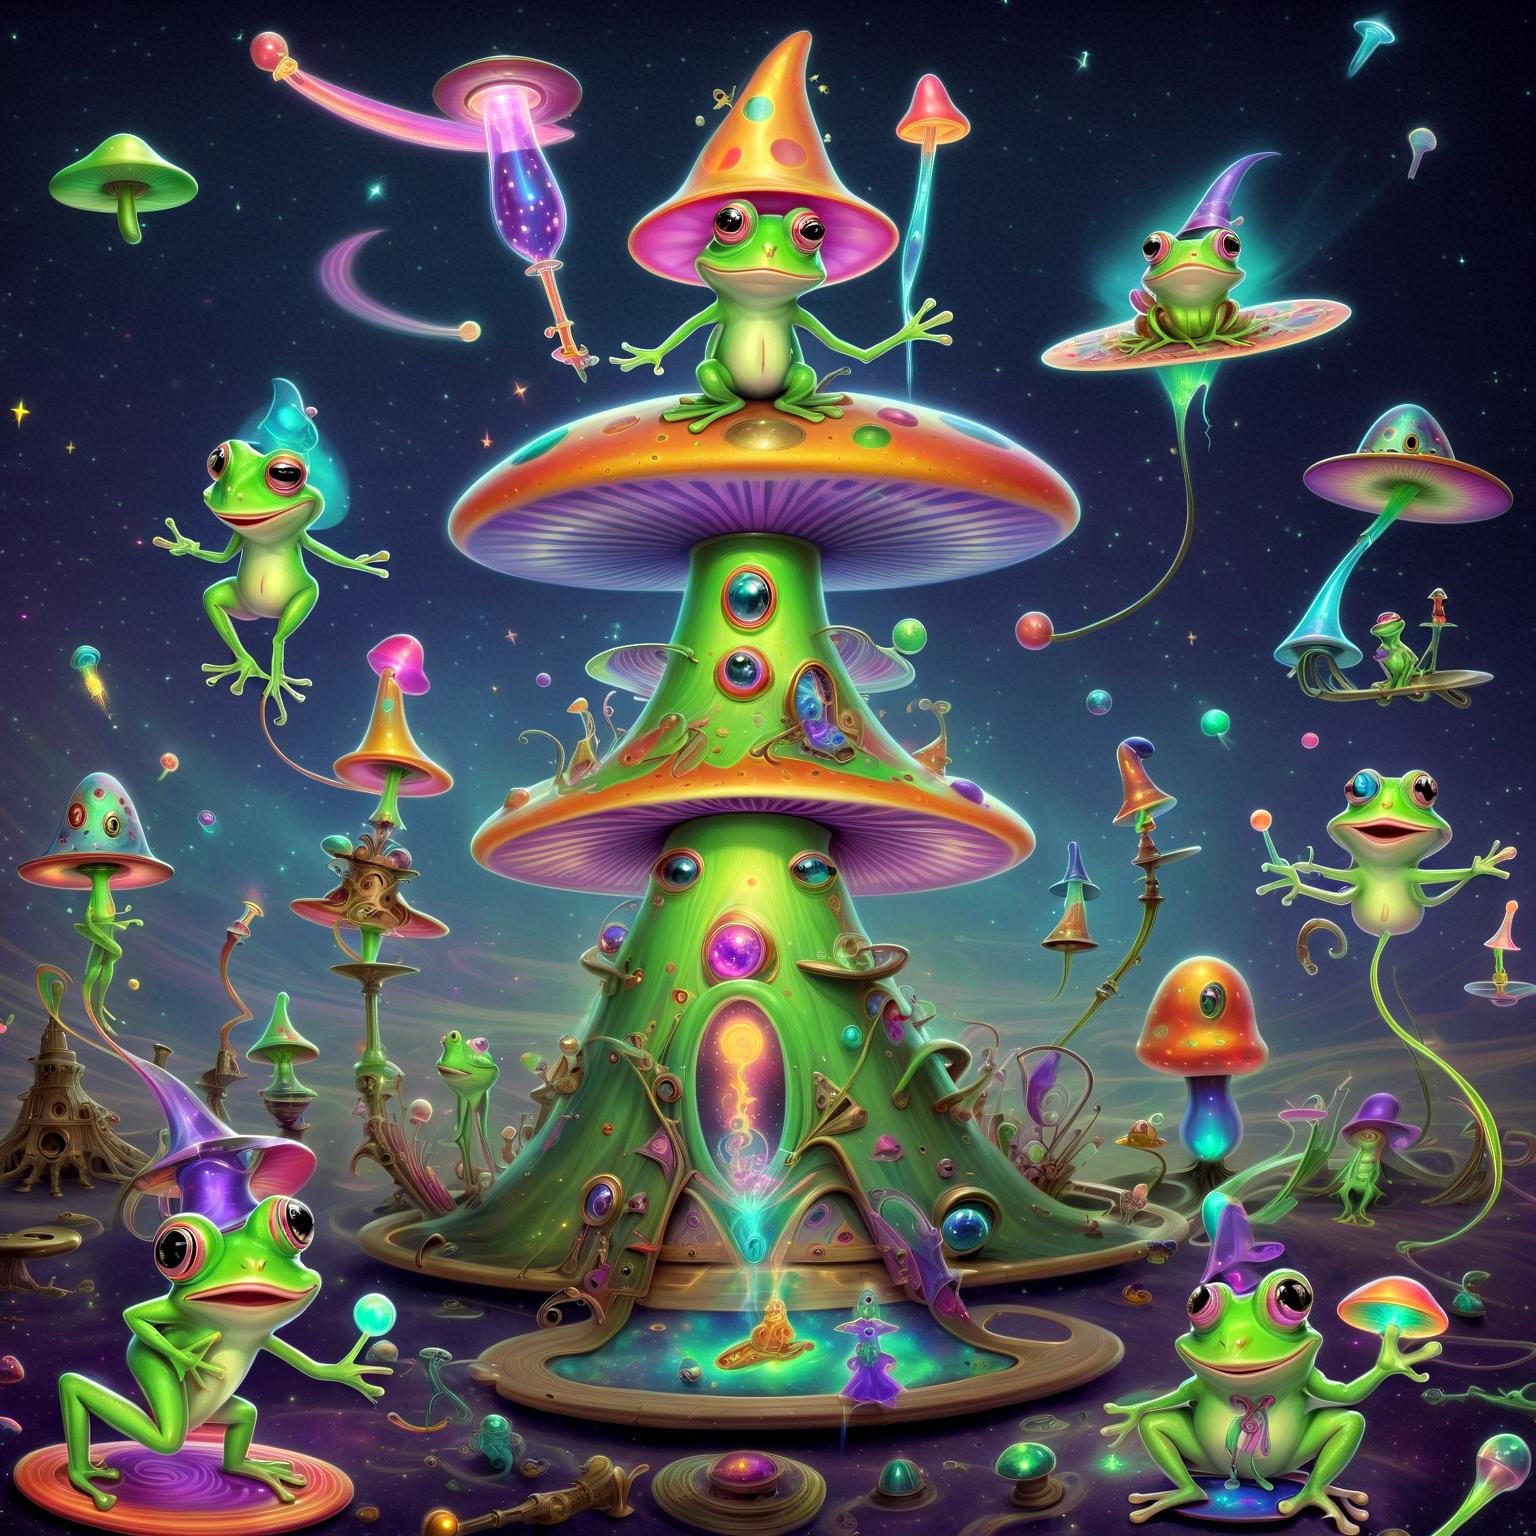 Frogs dressed as wizards conjure technicolor spells, aliens experiment with bizarre contraptions, and a girl enters a whimsical trance. Everything warps into surreal caricatures as they journey through LSD-inspired realms. Mushroom-shaped planets, giggling stars, and neon frogs set the stage for their psychedelic escapade.,in style of(bangerooo:1.15), ,